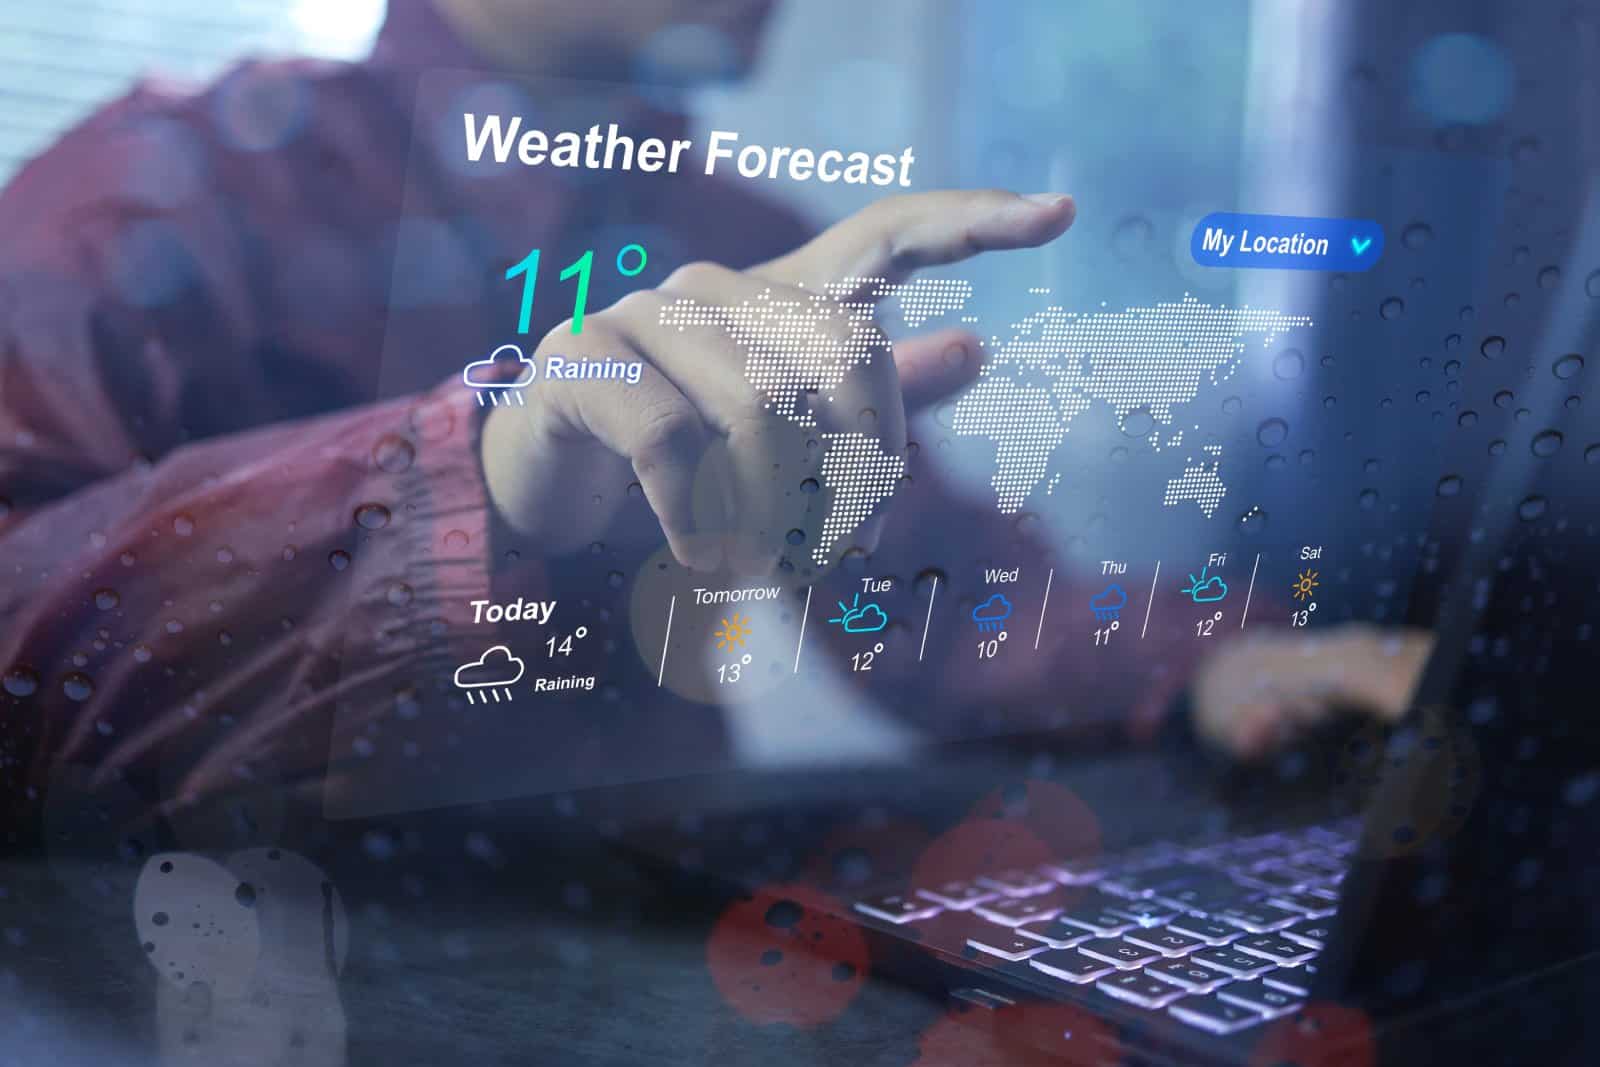 Image Credit: Shutterstock / Aree_S <p>Looking at weather patterns and storm forecasts can give you an idea of what to expect. Some apps provide real-time turbulence forecasts.</p>